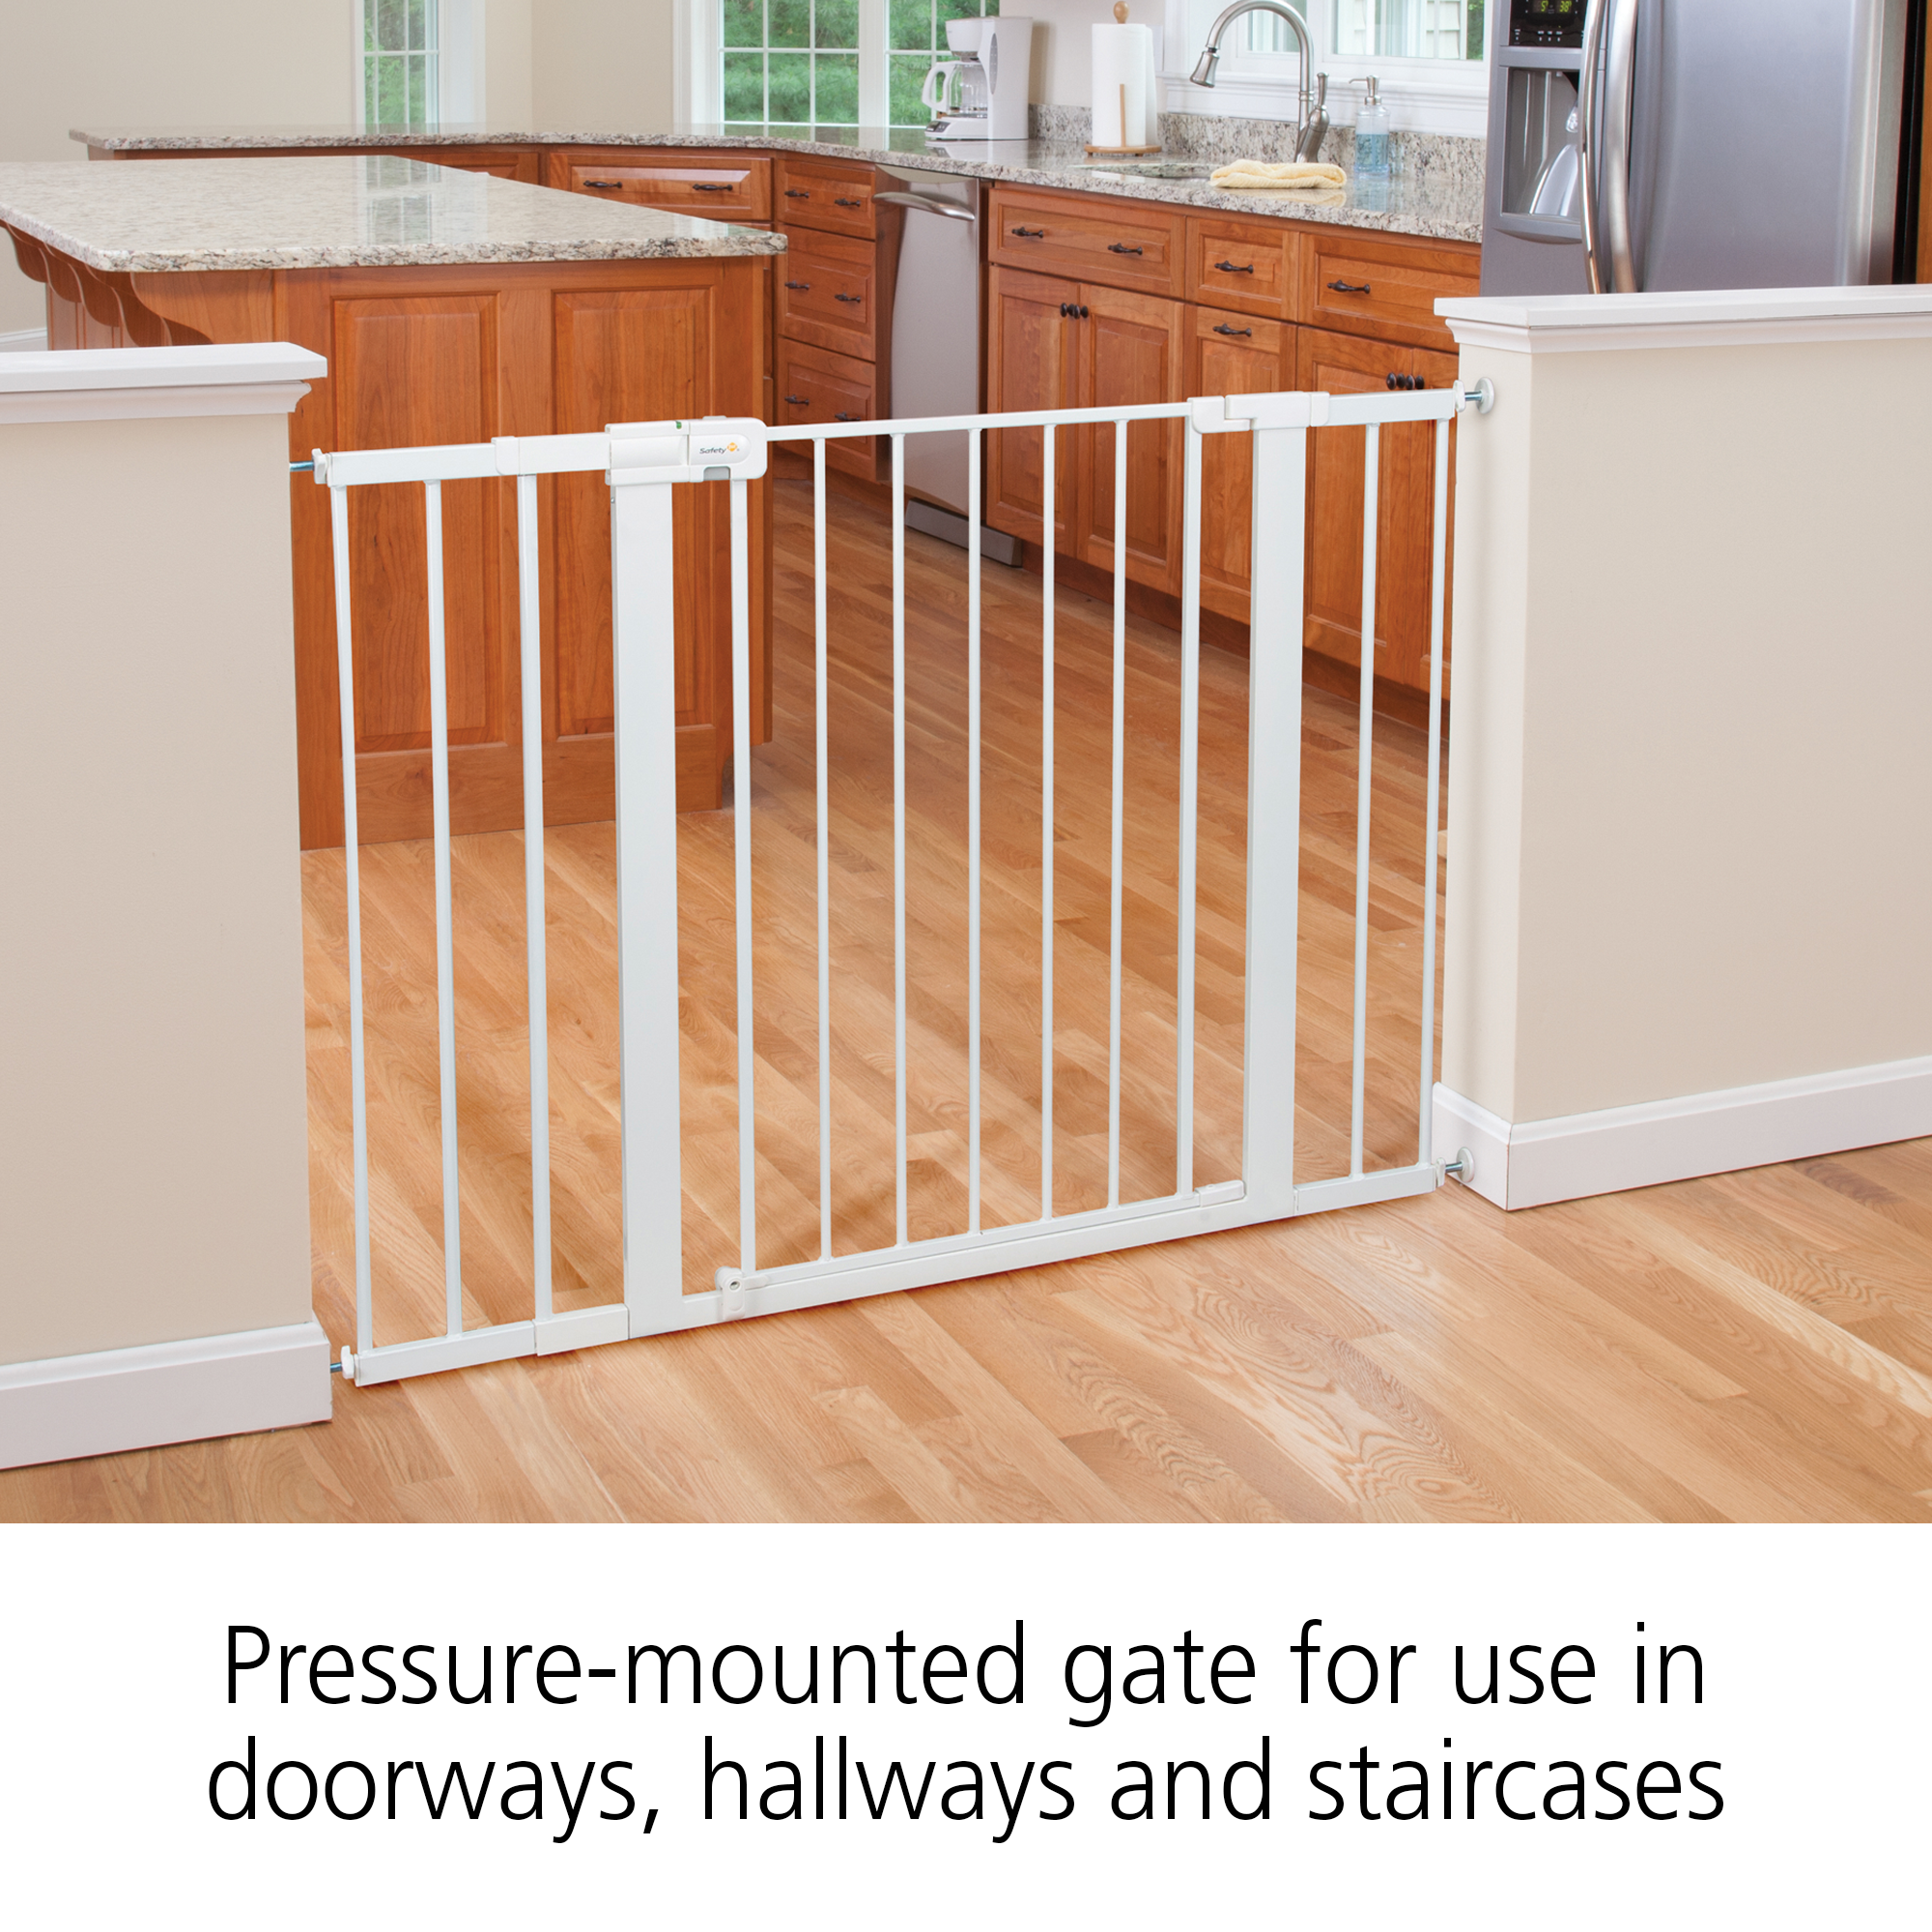 Pressure-mounted gate for use in doorways, hallways and staircases